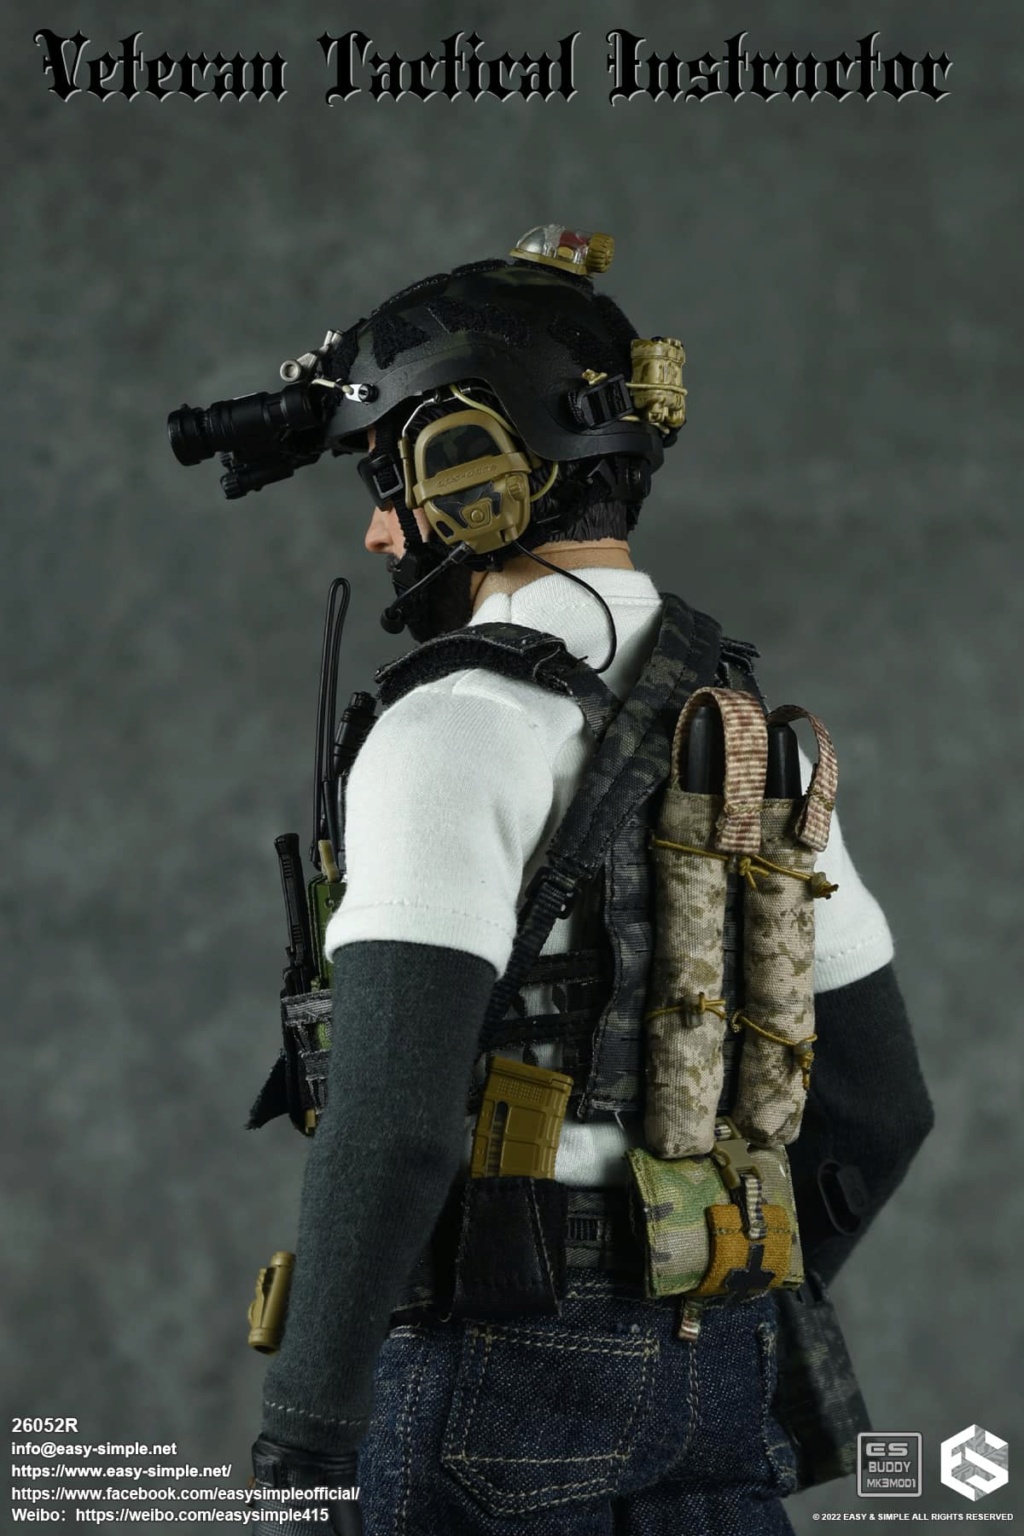 easy - NEW PRODUCT: Easy&Simple: 26052R 1/6 Scale Veteran Tactical Instructor 31159410